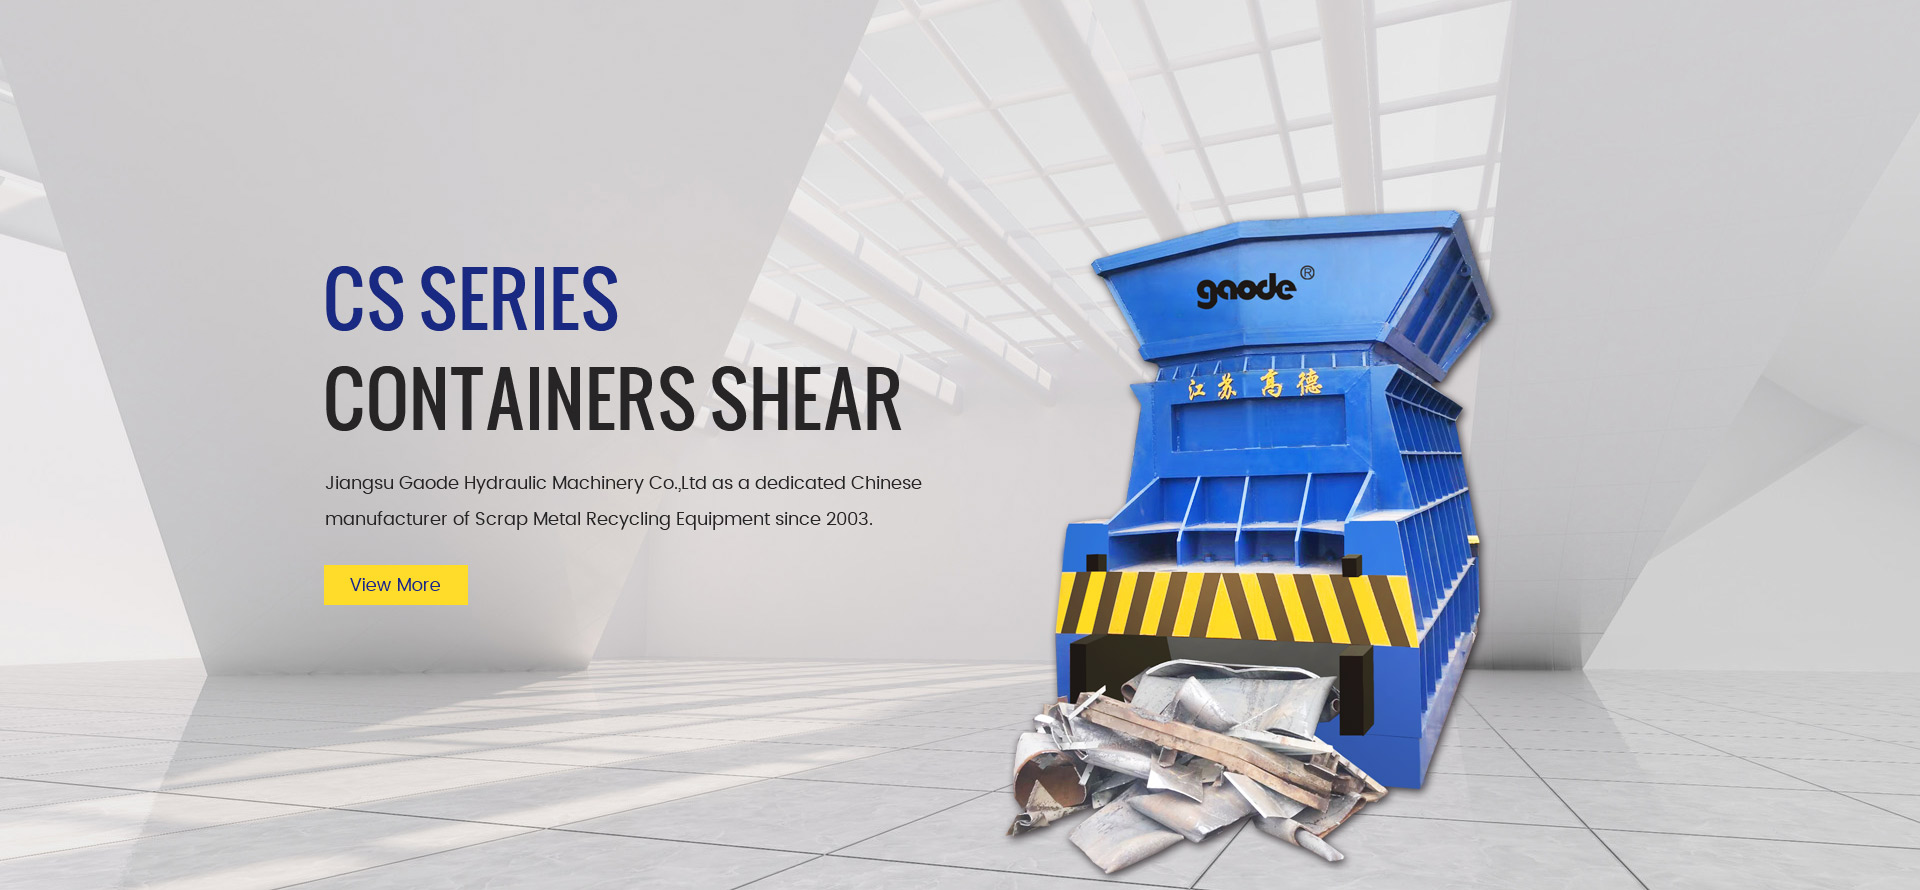 Cs Series Containers Shear